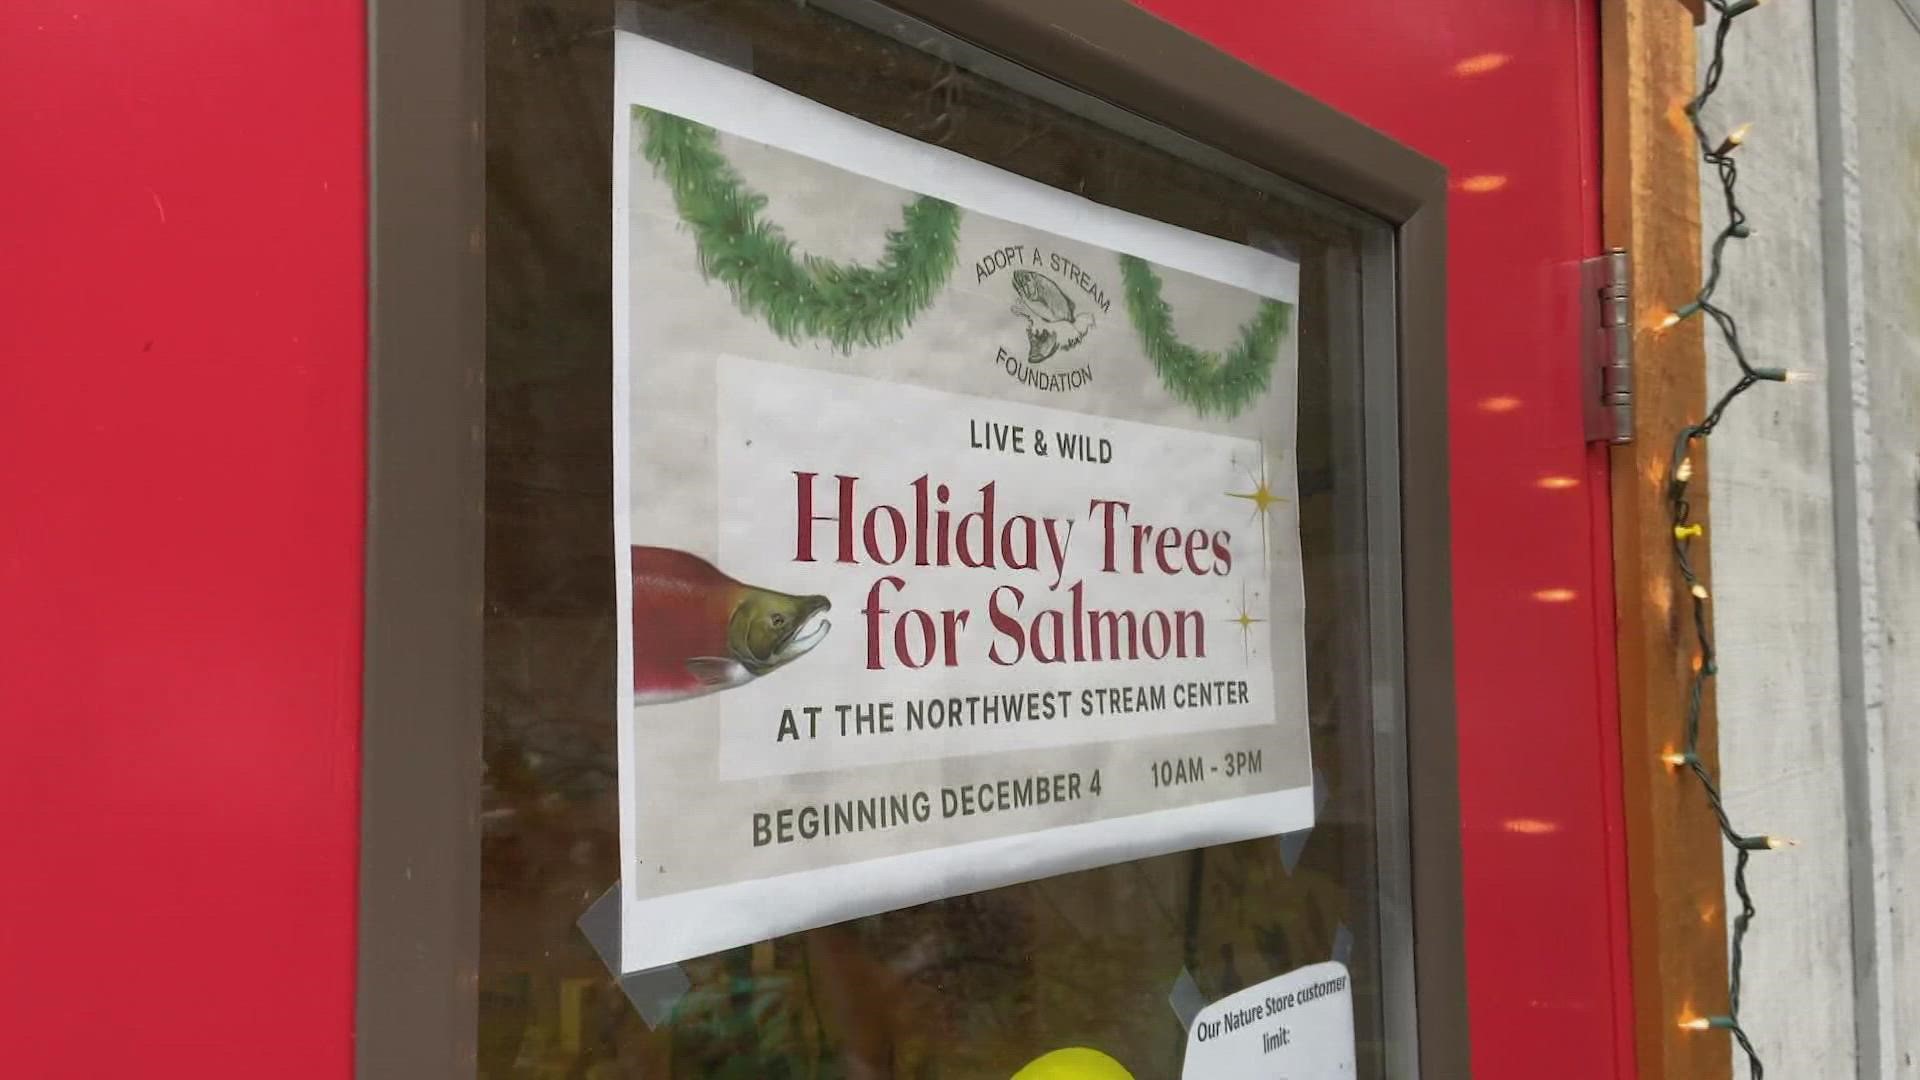 An Everett-based non-profit will plant trees returned to them alongside nearby salmon runs.